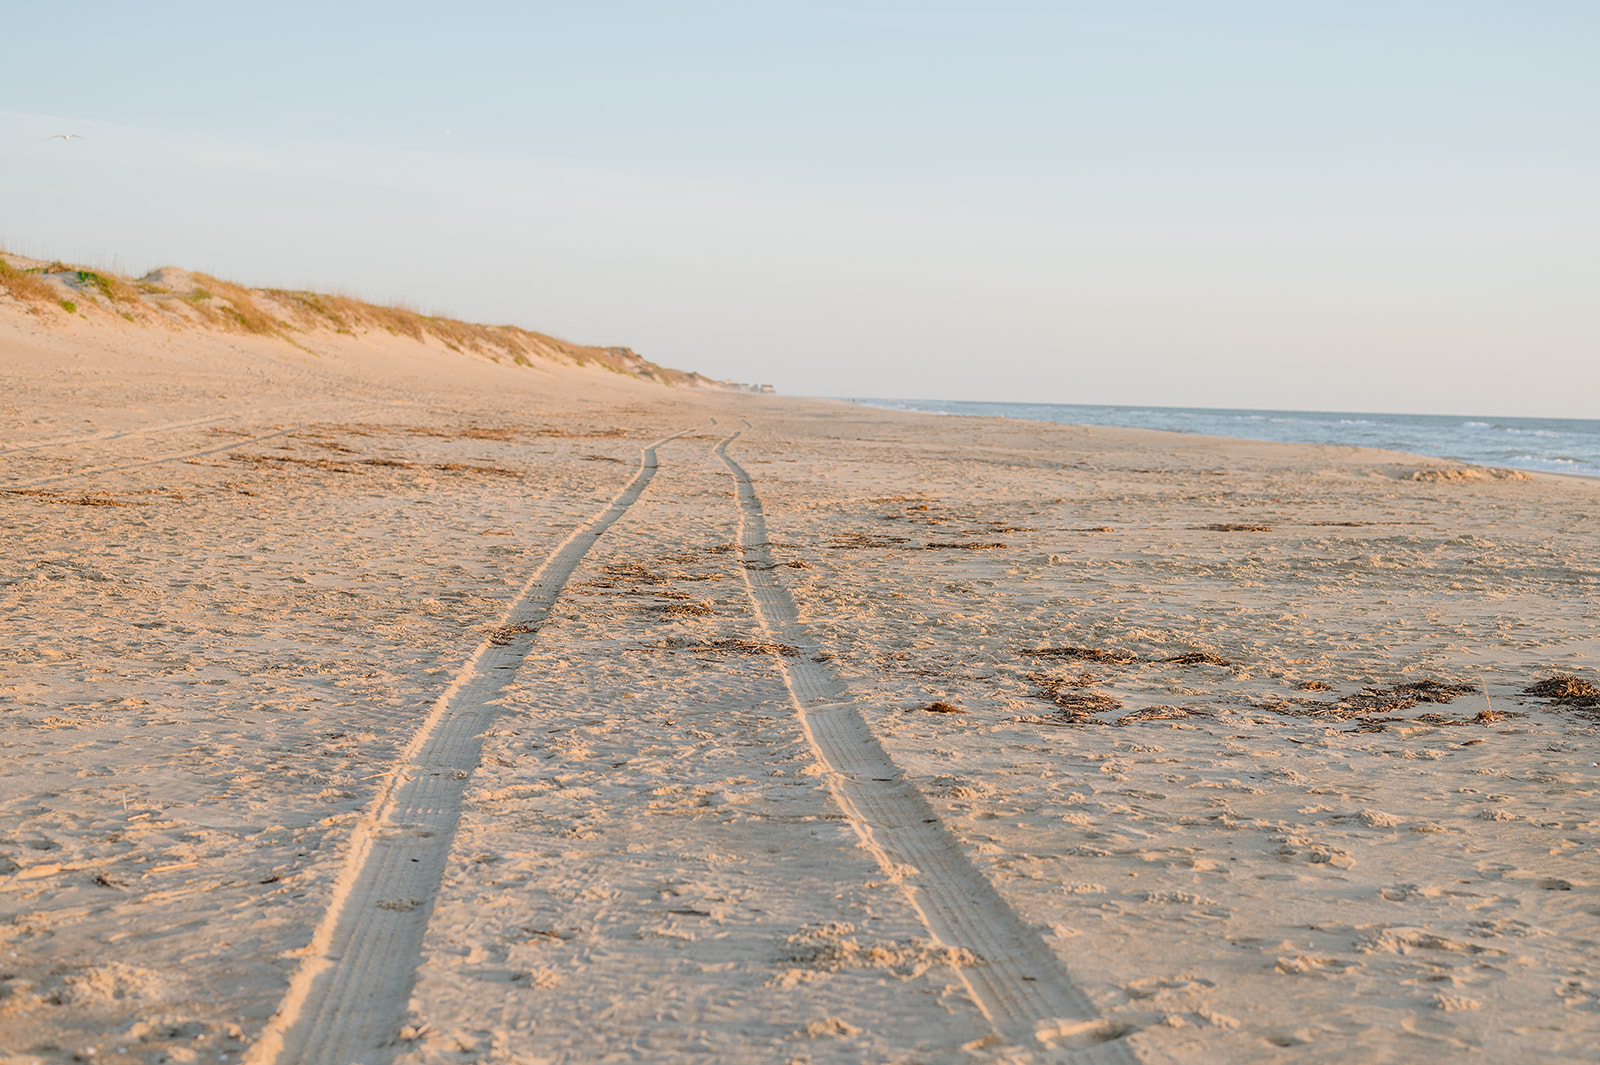 Image of tire tracks in the sand on the beach.